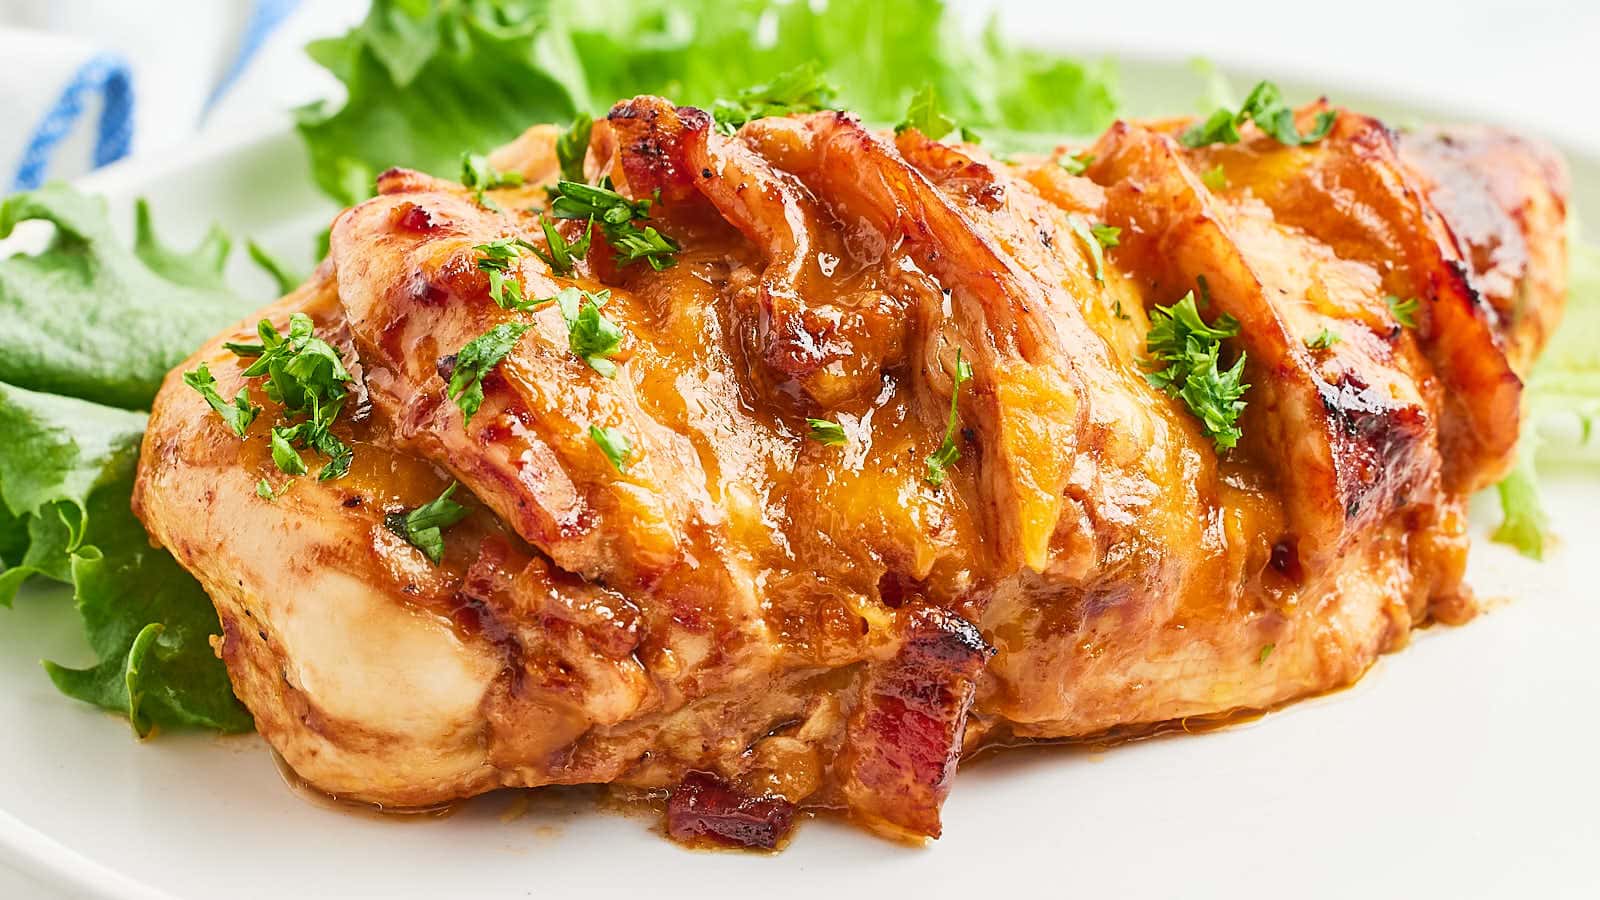 BBQ Hasselback Chicken recipe by Cheerful Cook.